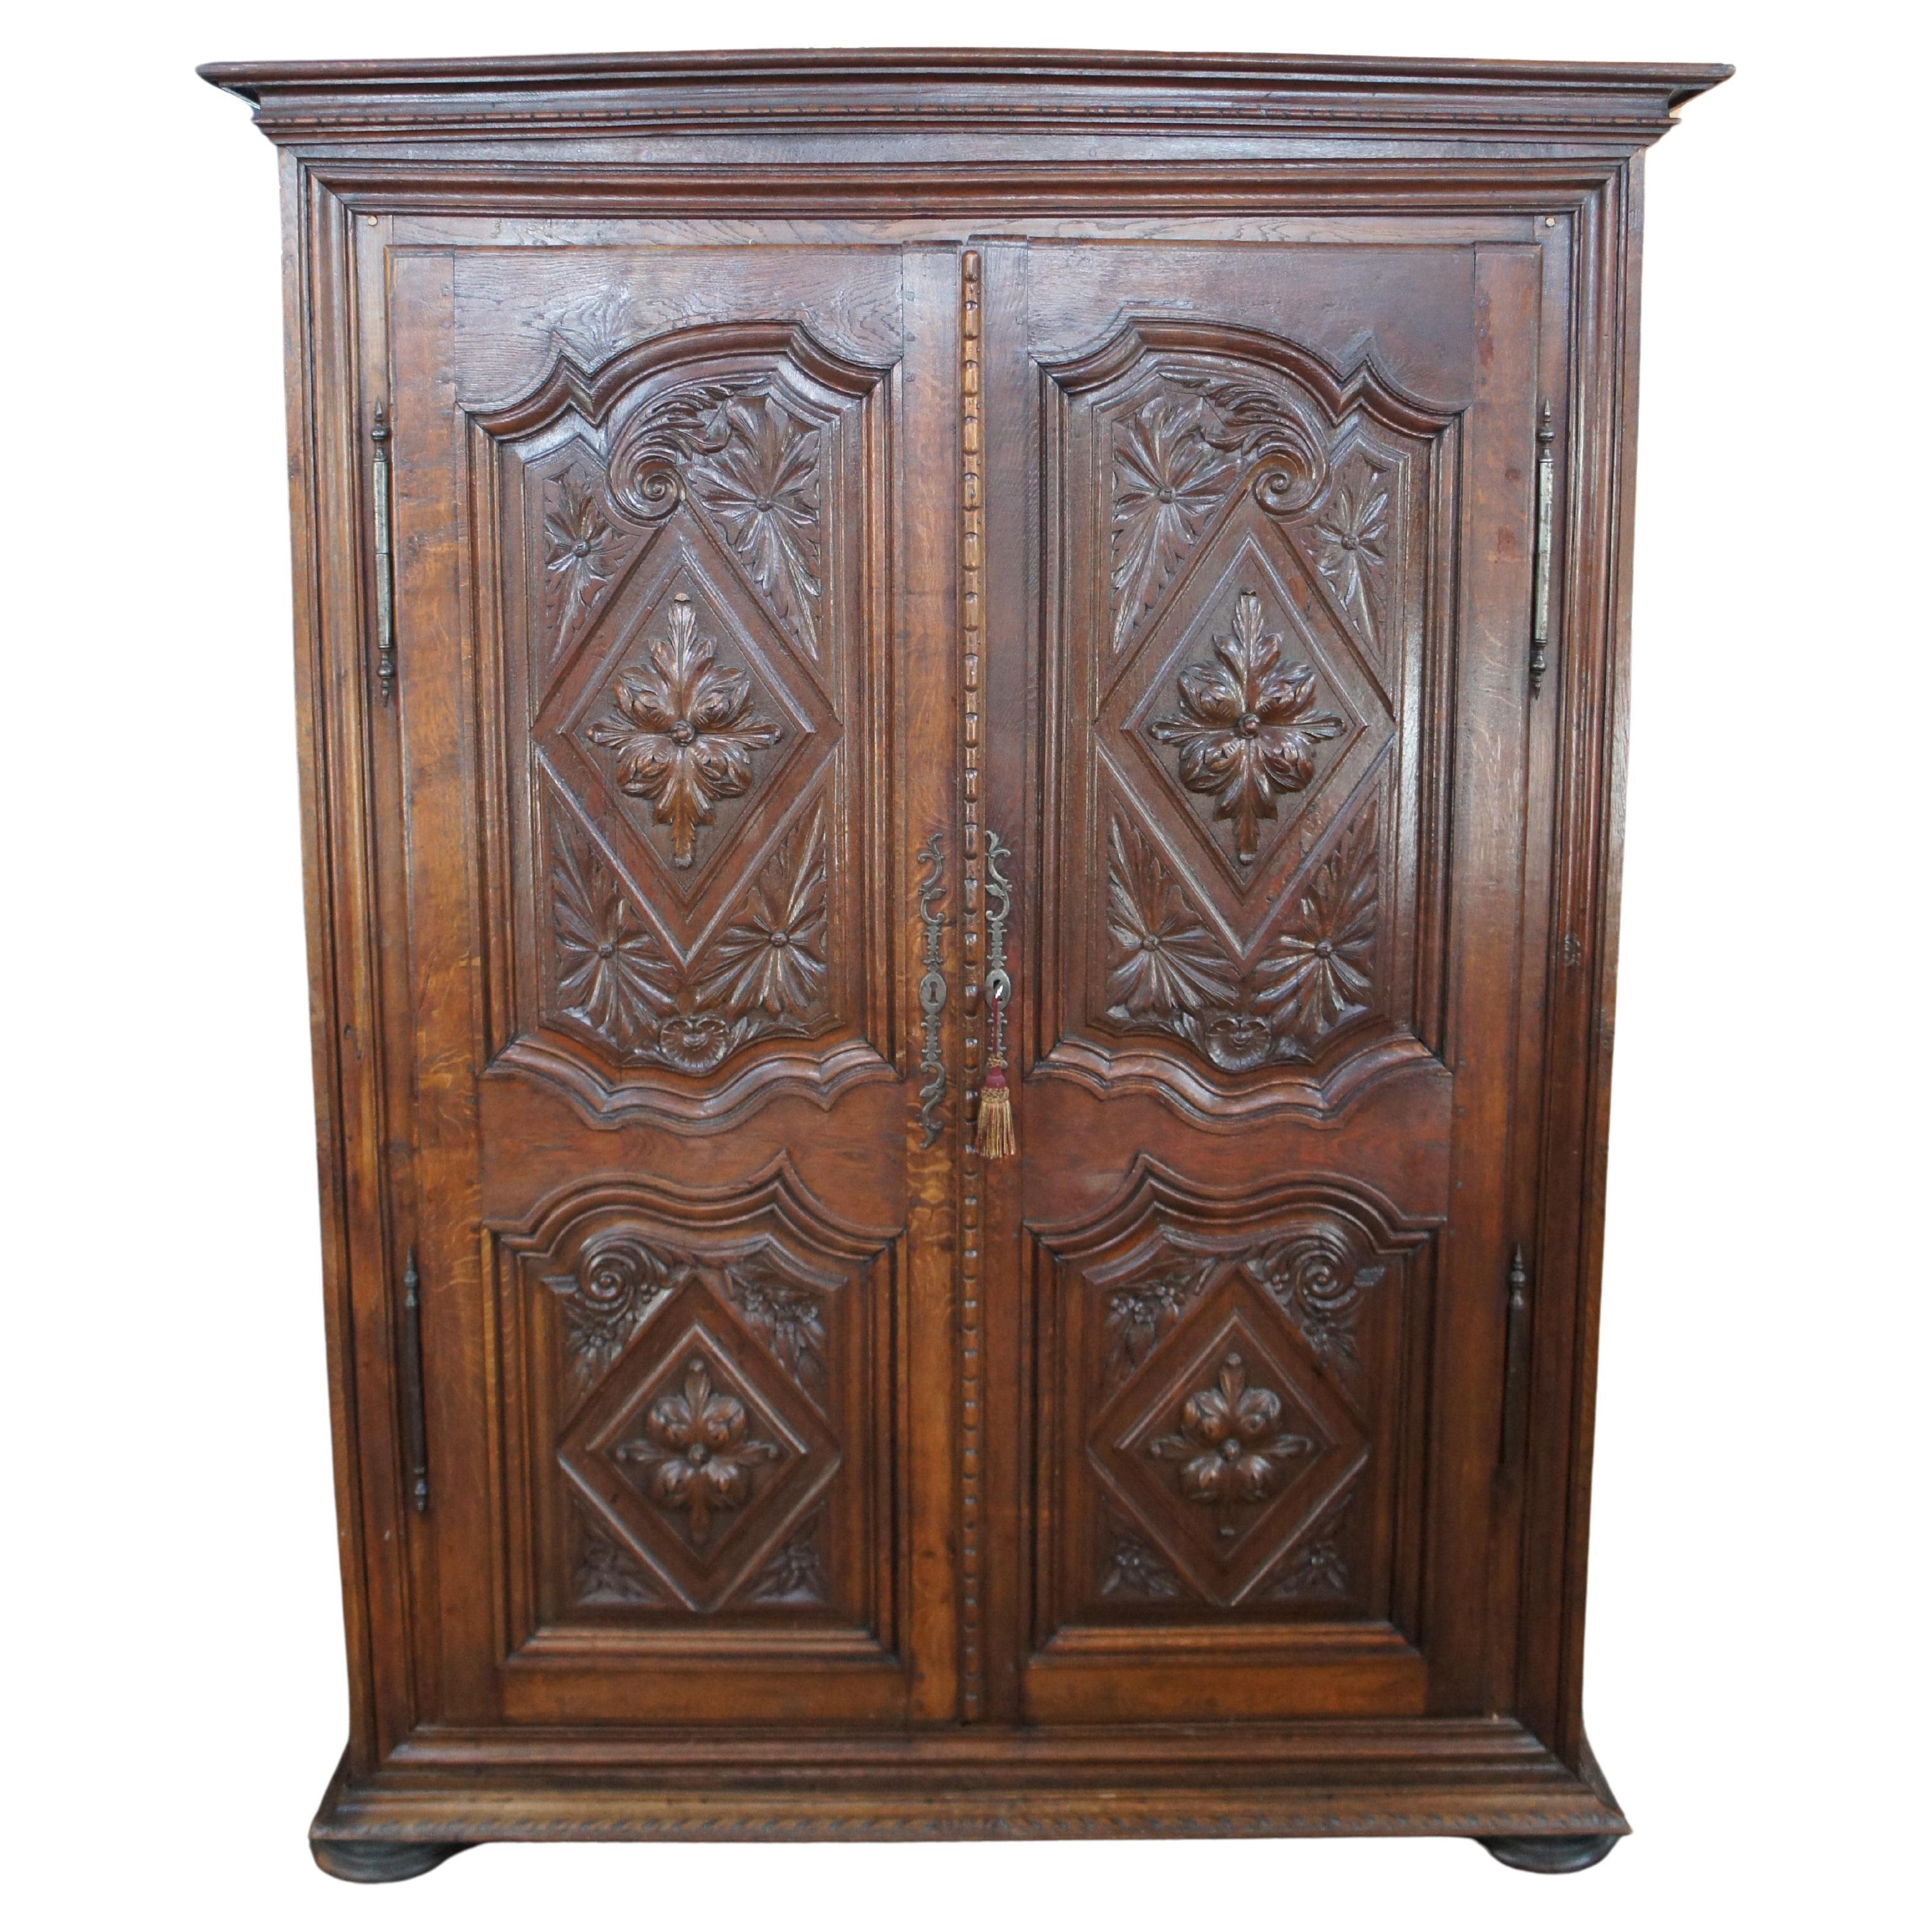 An exceptional 18th century French Knockdown Armoire.  Made from oak with beautifully hand carved inset paneled doors featuring diamonds, French foliate and scrolling wing motifs.  The cabinet opens to shelving which can be removed to allow access